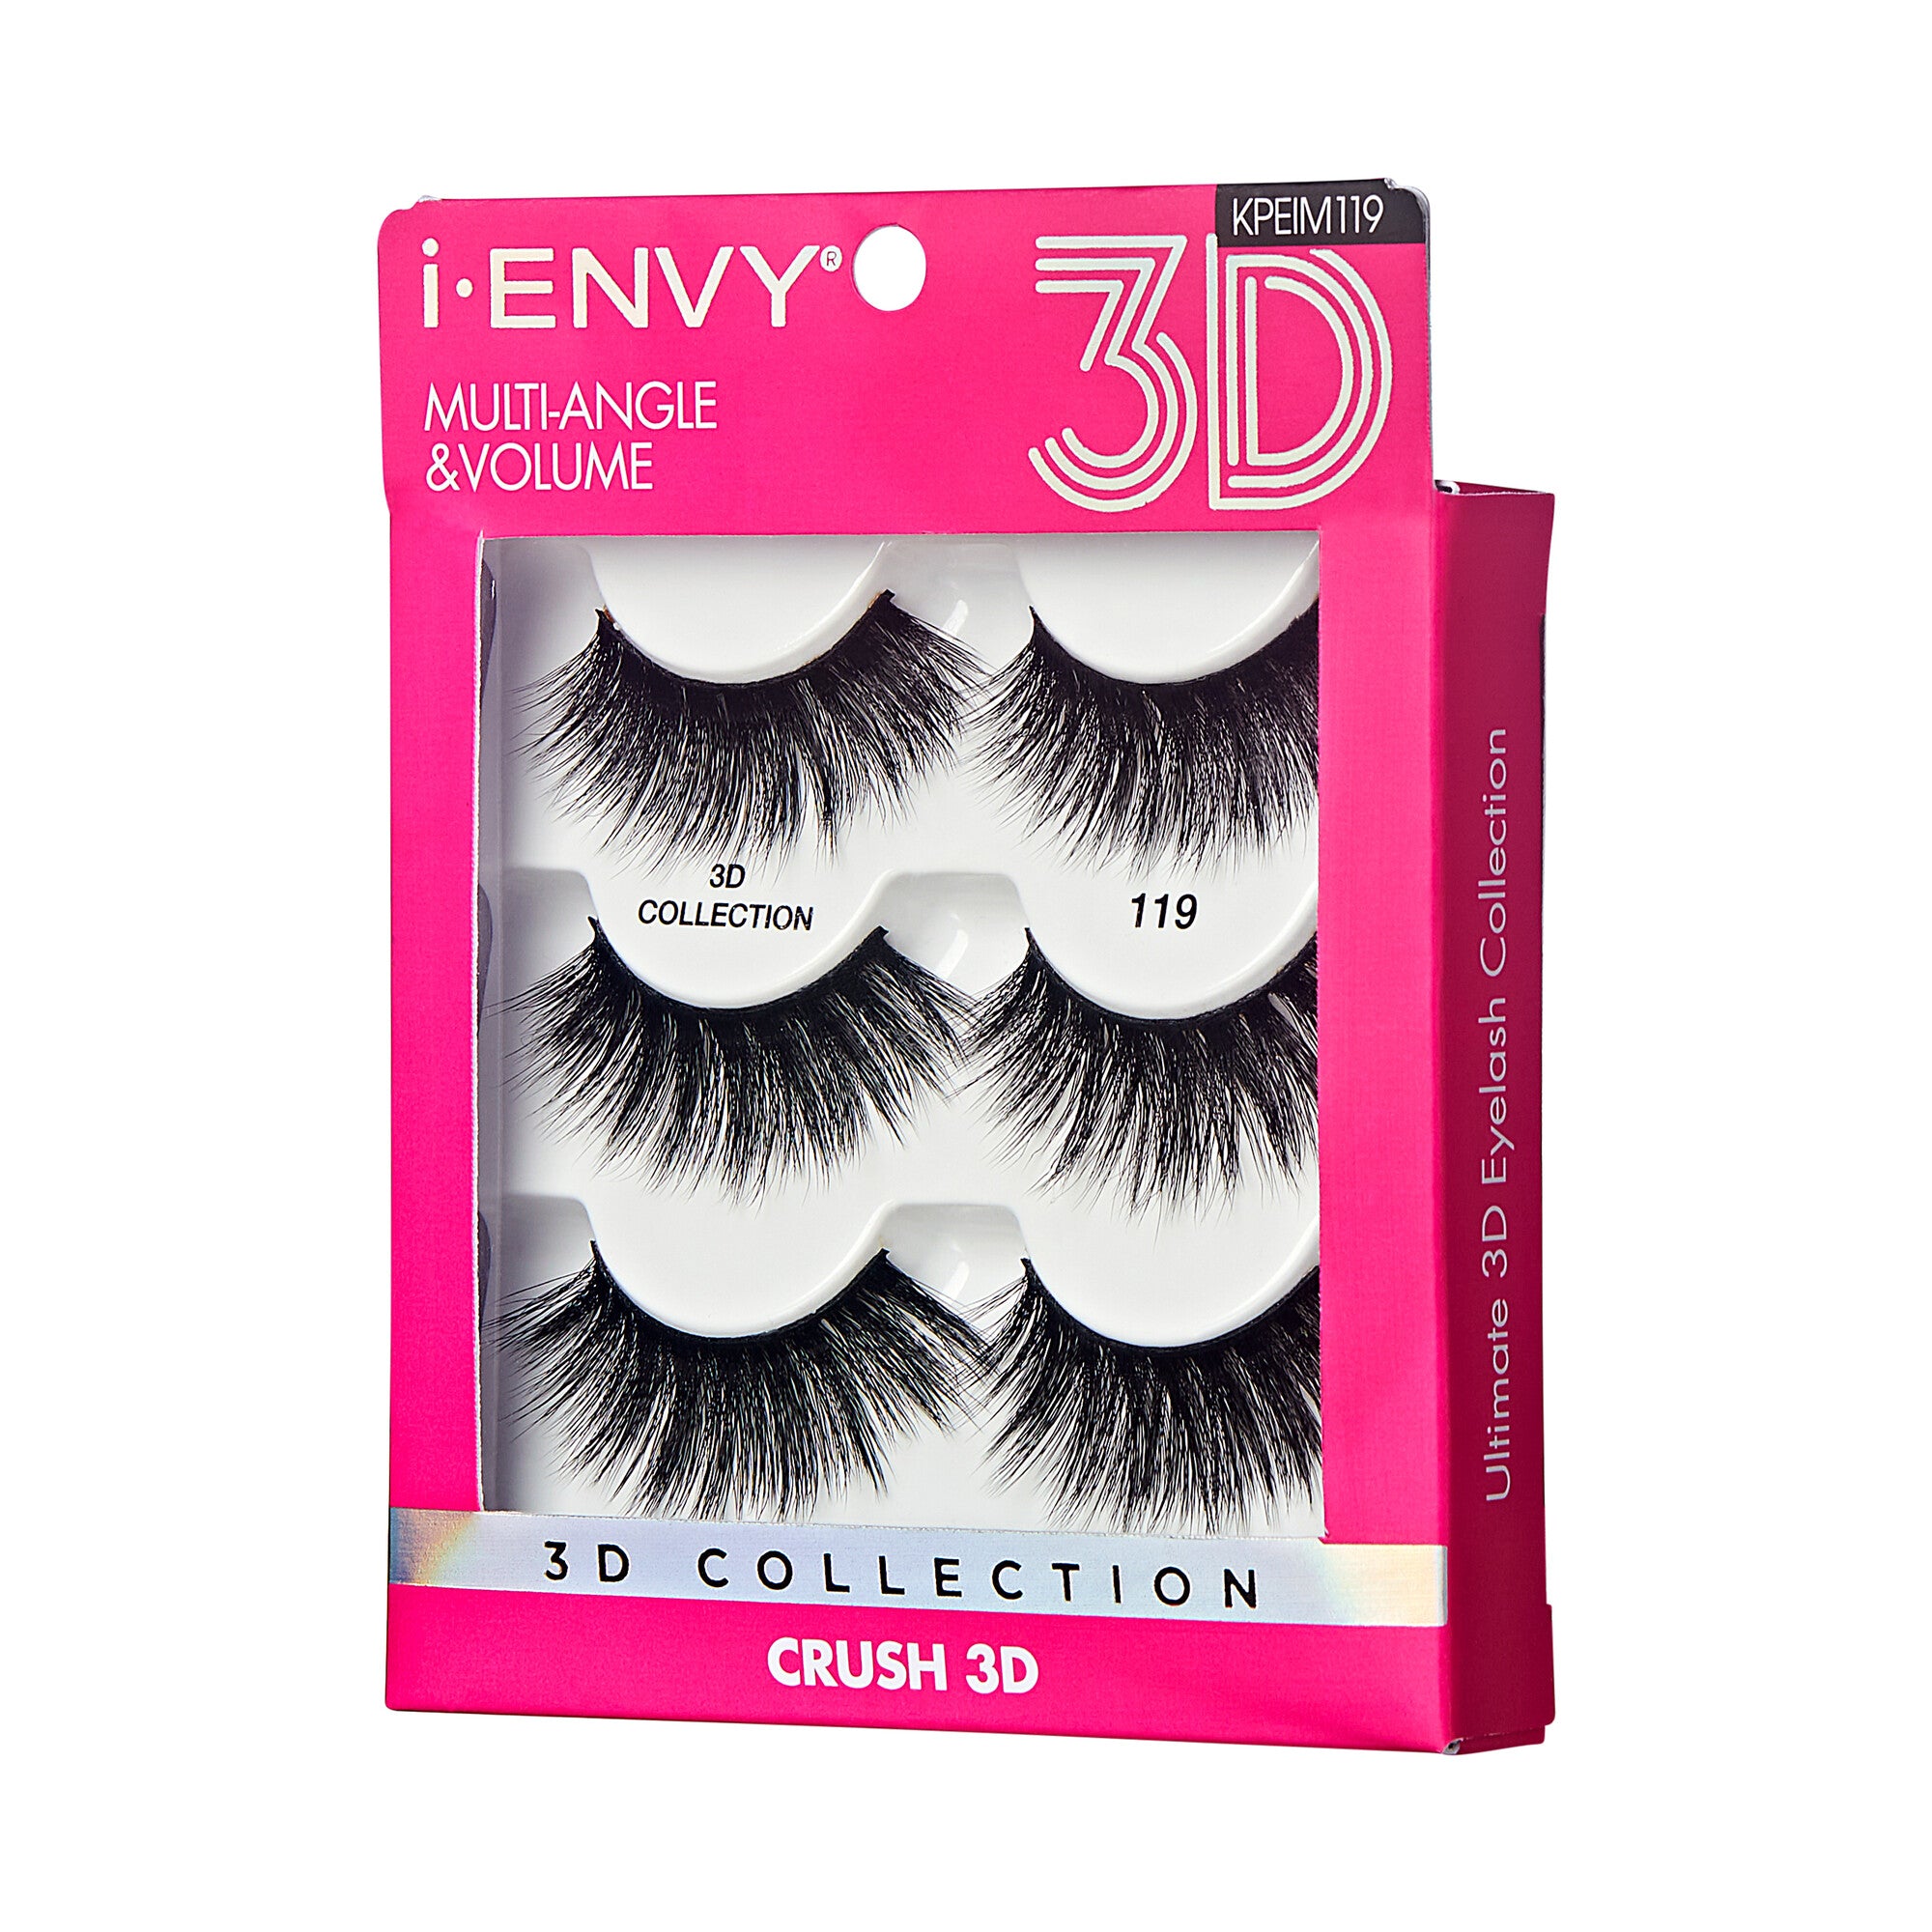 I.Envy By Kiss 3D Lashes Multi Pack Multiangle & Volume Collection-119 (KPEIM119)